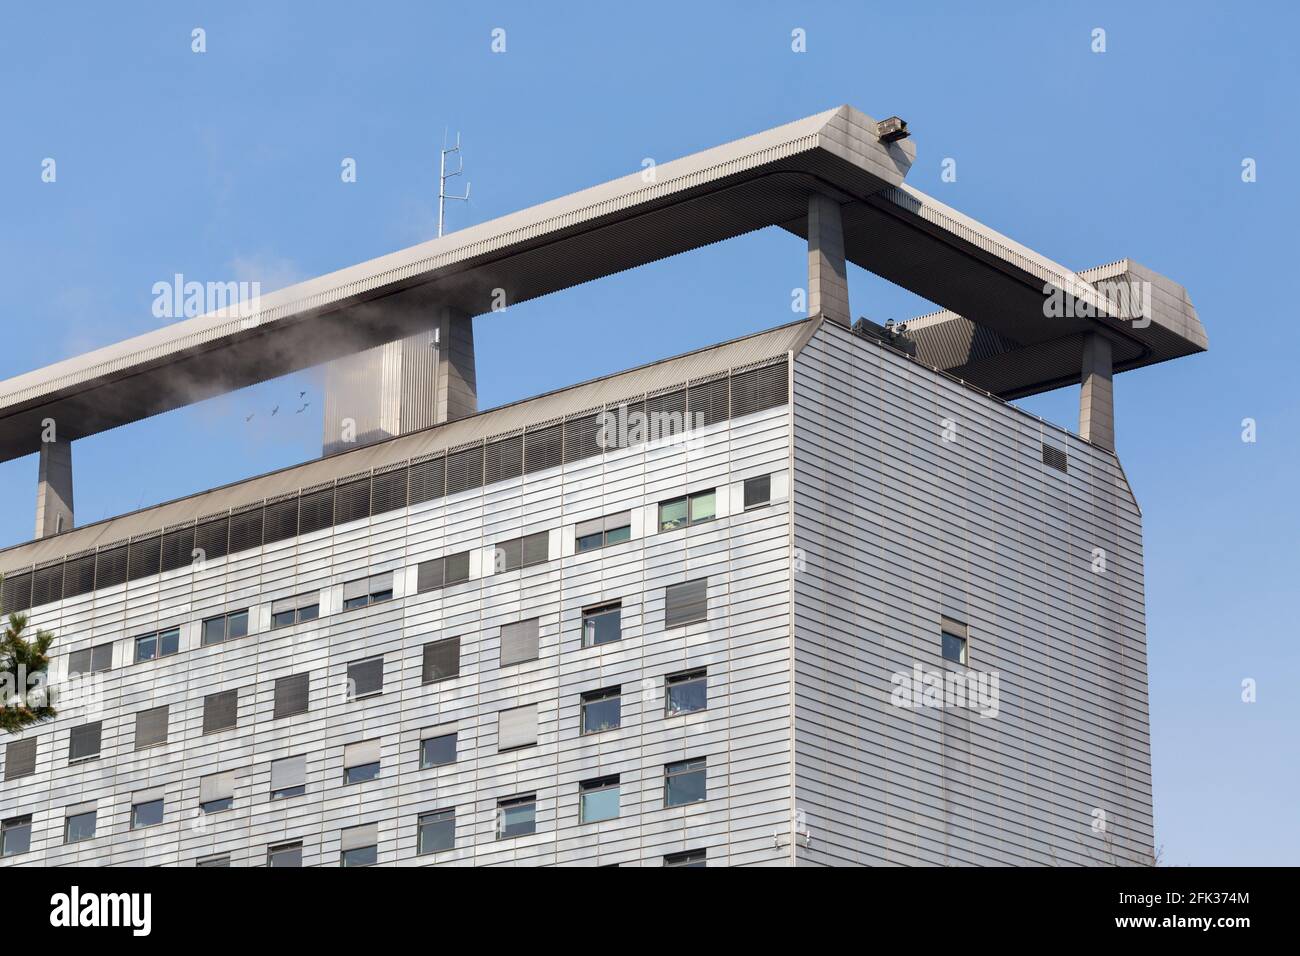 Munich, Großhadern, Germany - Mar 9, 2021: Close up view of the main building of Klinikum Großhadern. One of the largest and most famous hospitals in Stock Photo